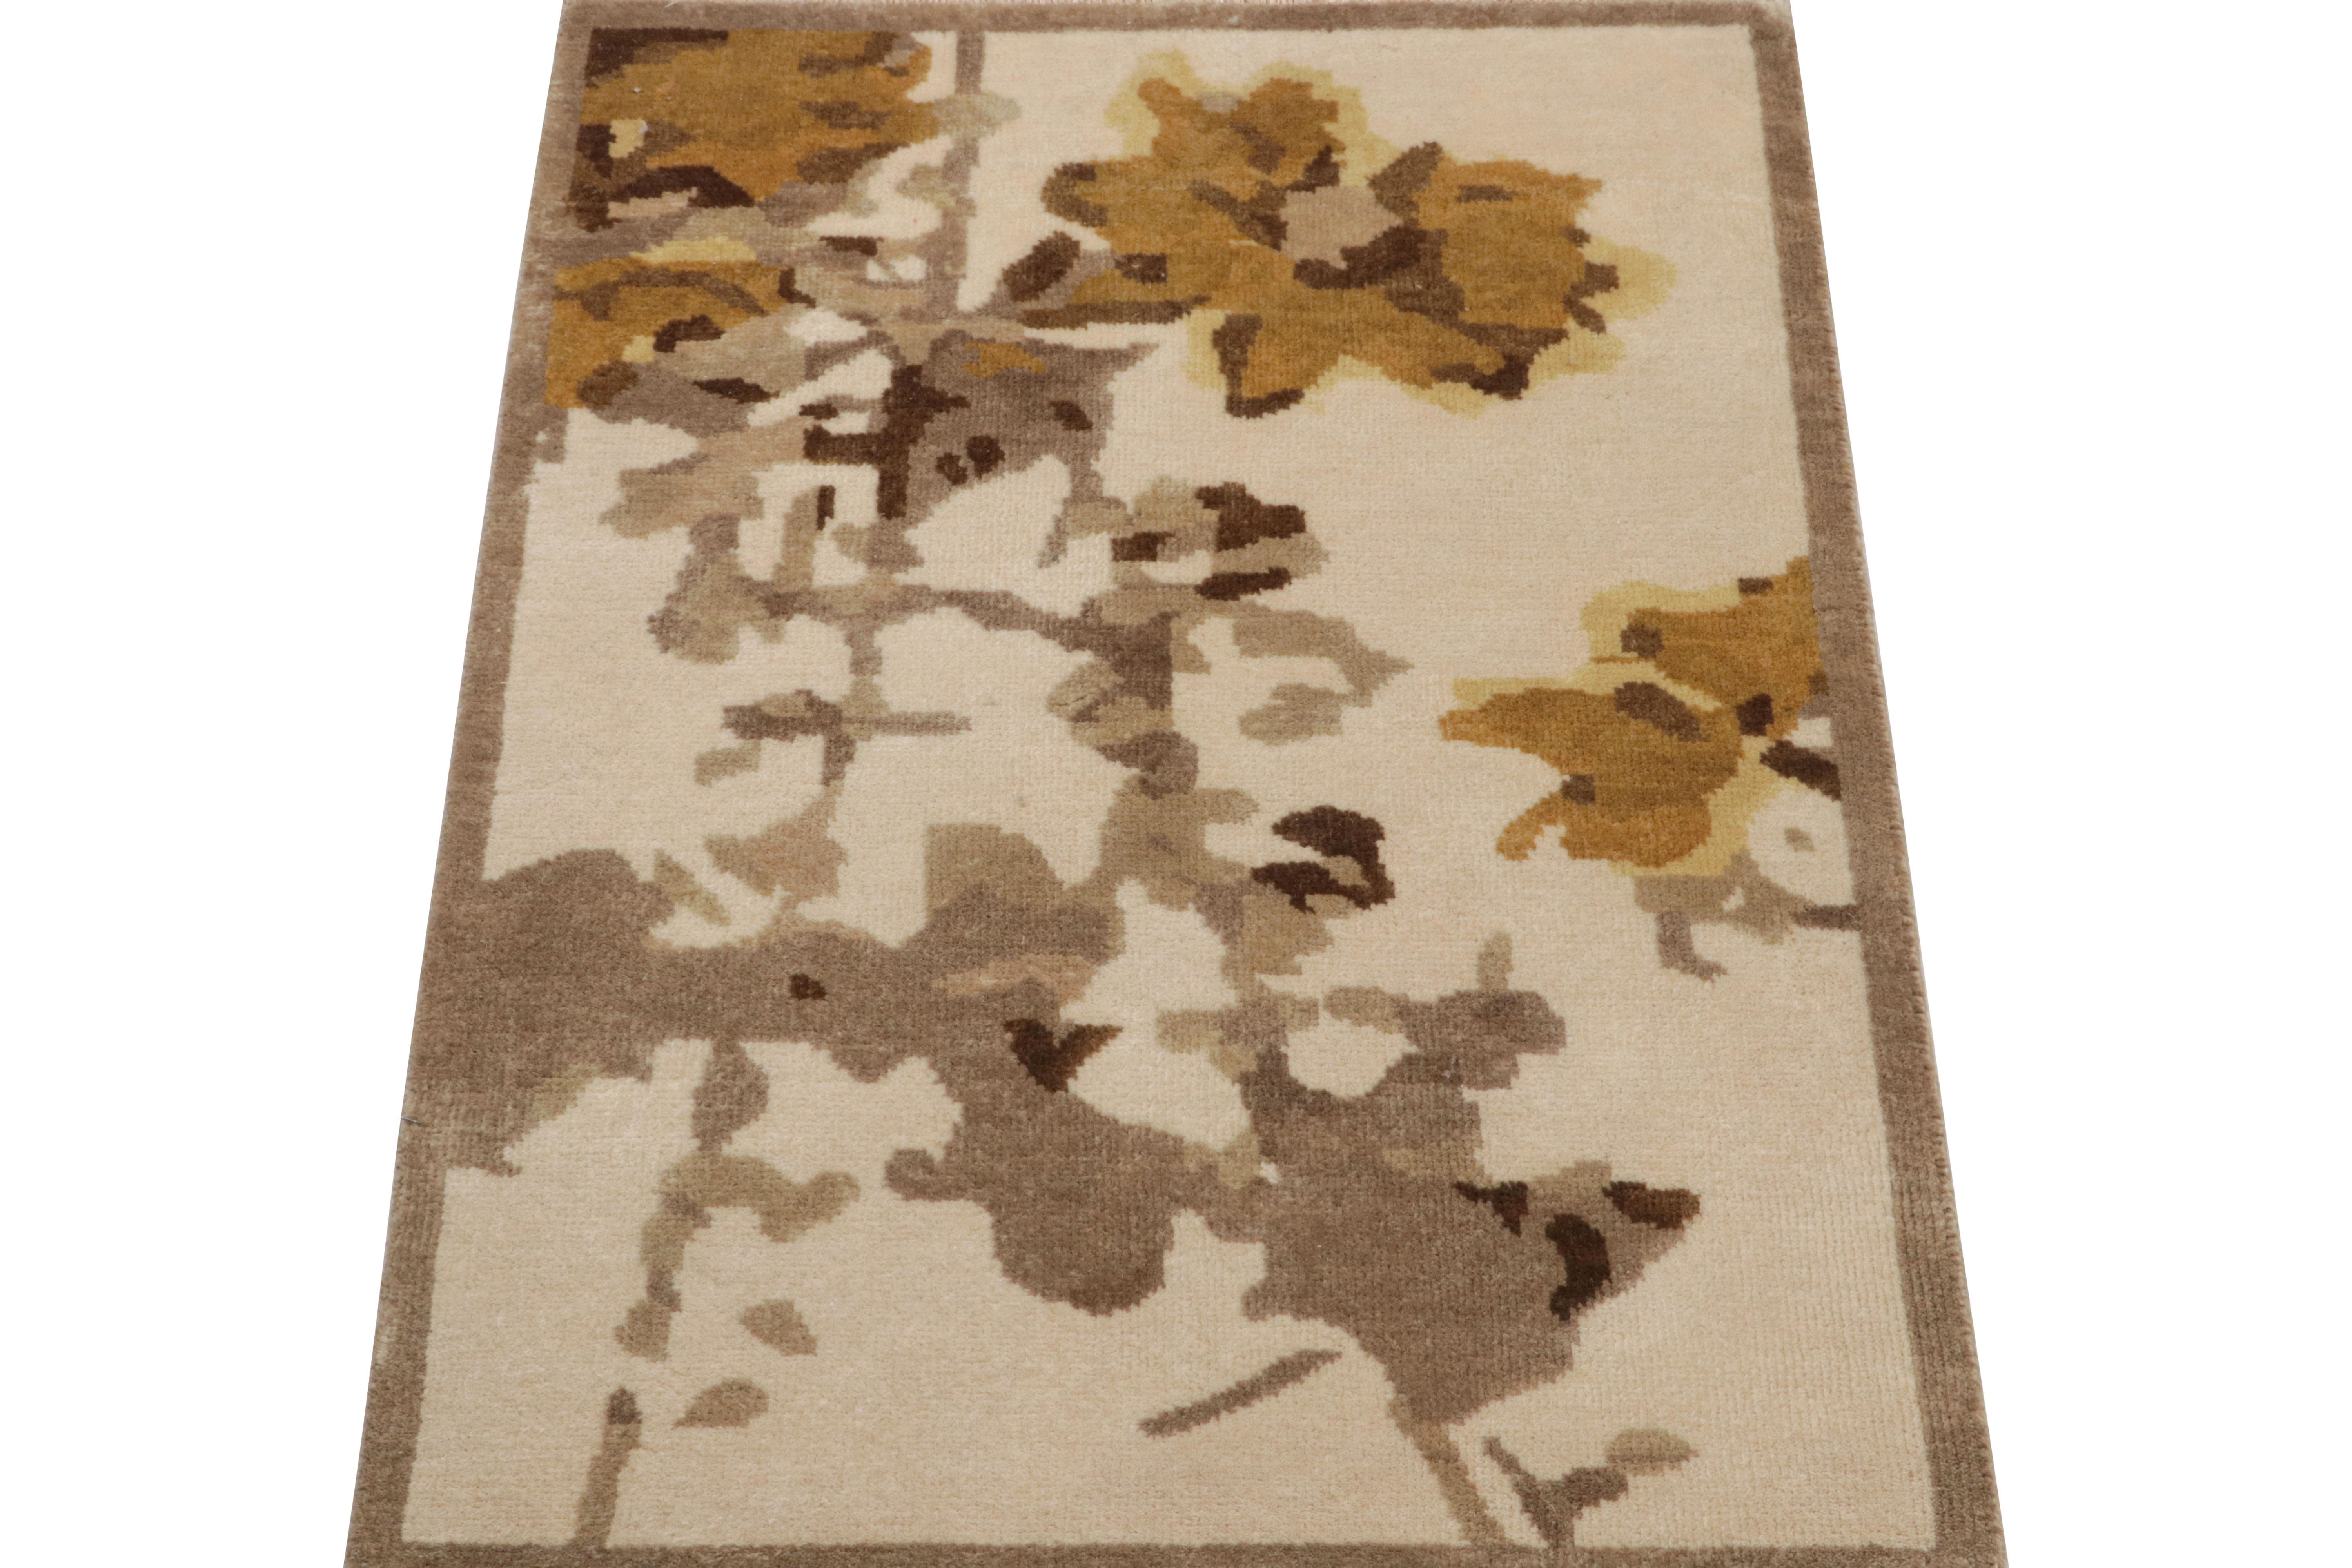 Hand-knotted in wool, this 2x3 modern rug by Rug & Kilim is a new addition to their French Art Deco rug line.

On the Design: 

Admirers of the craft may appreciate the beige underscores taupe and gold tones in an impressionist-style floral pattern,